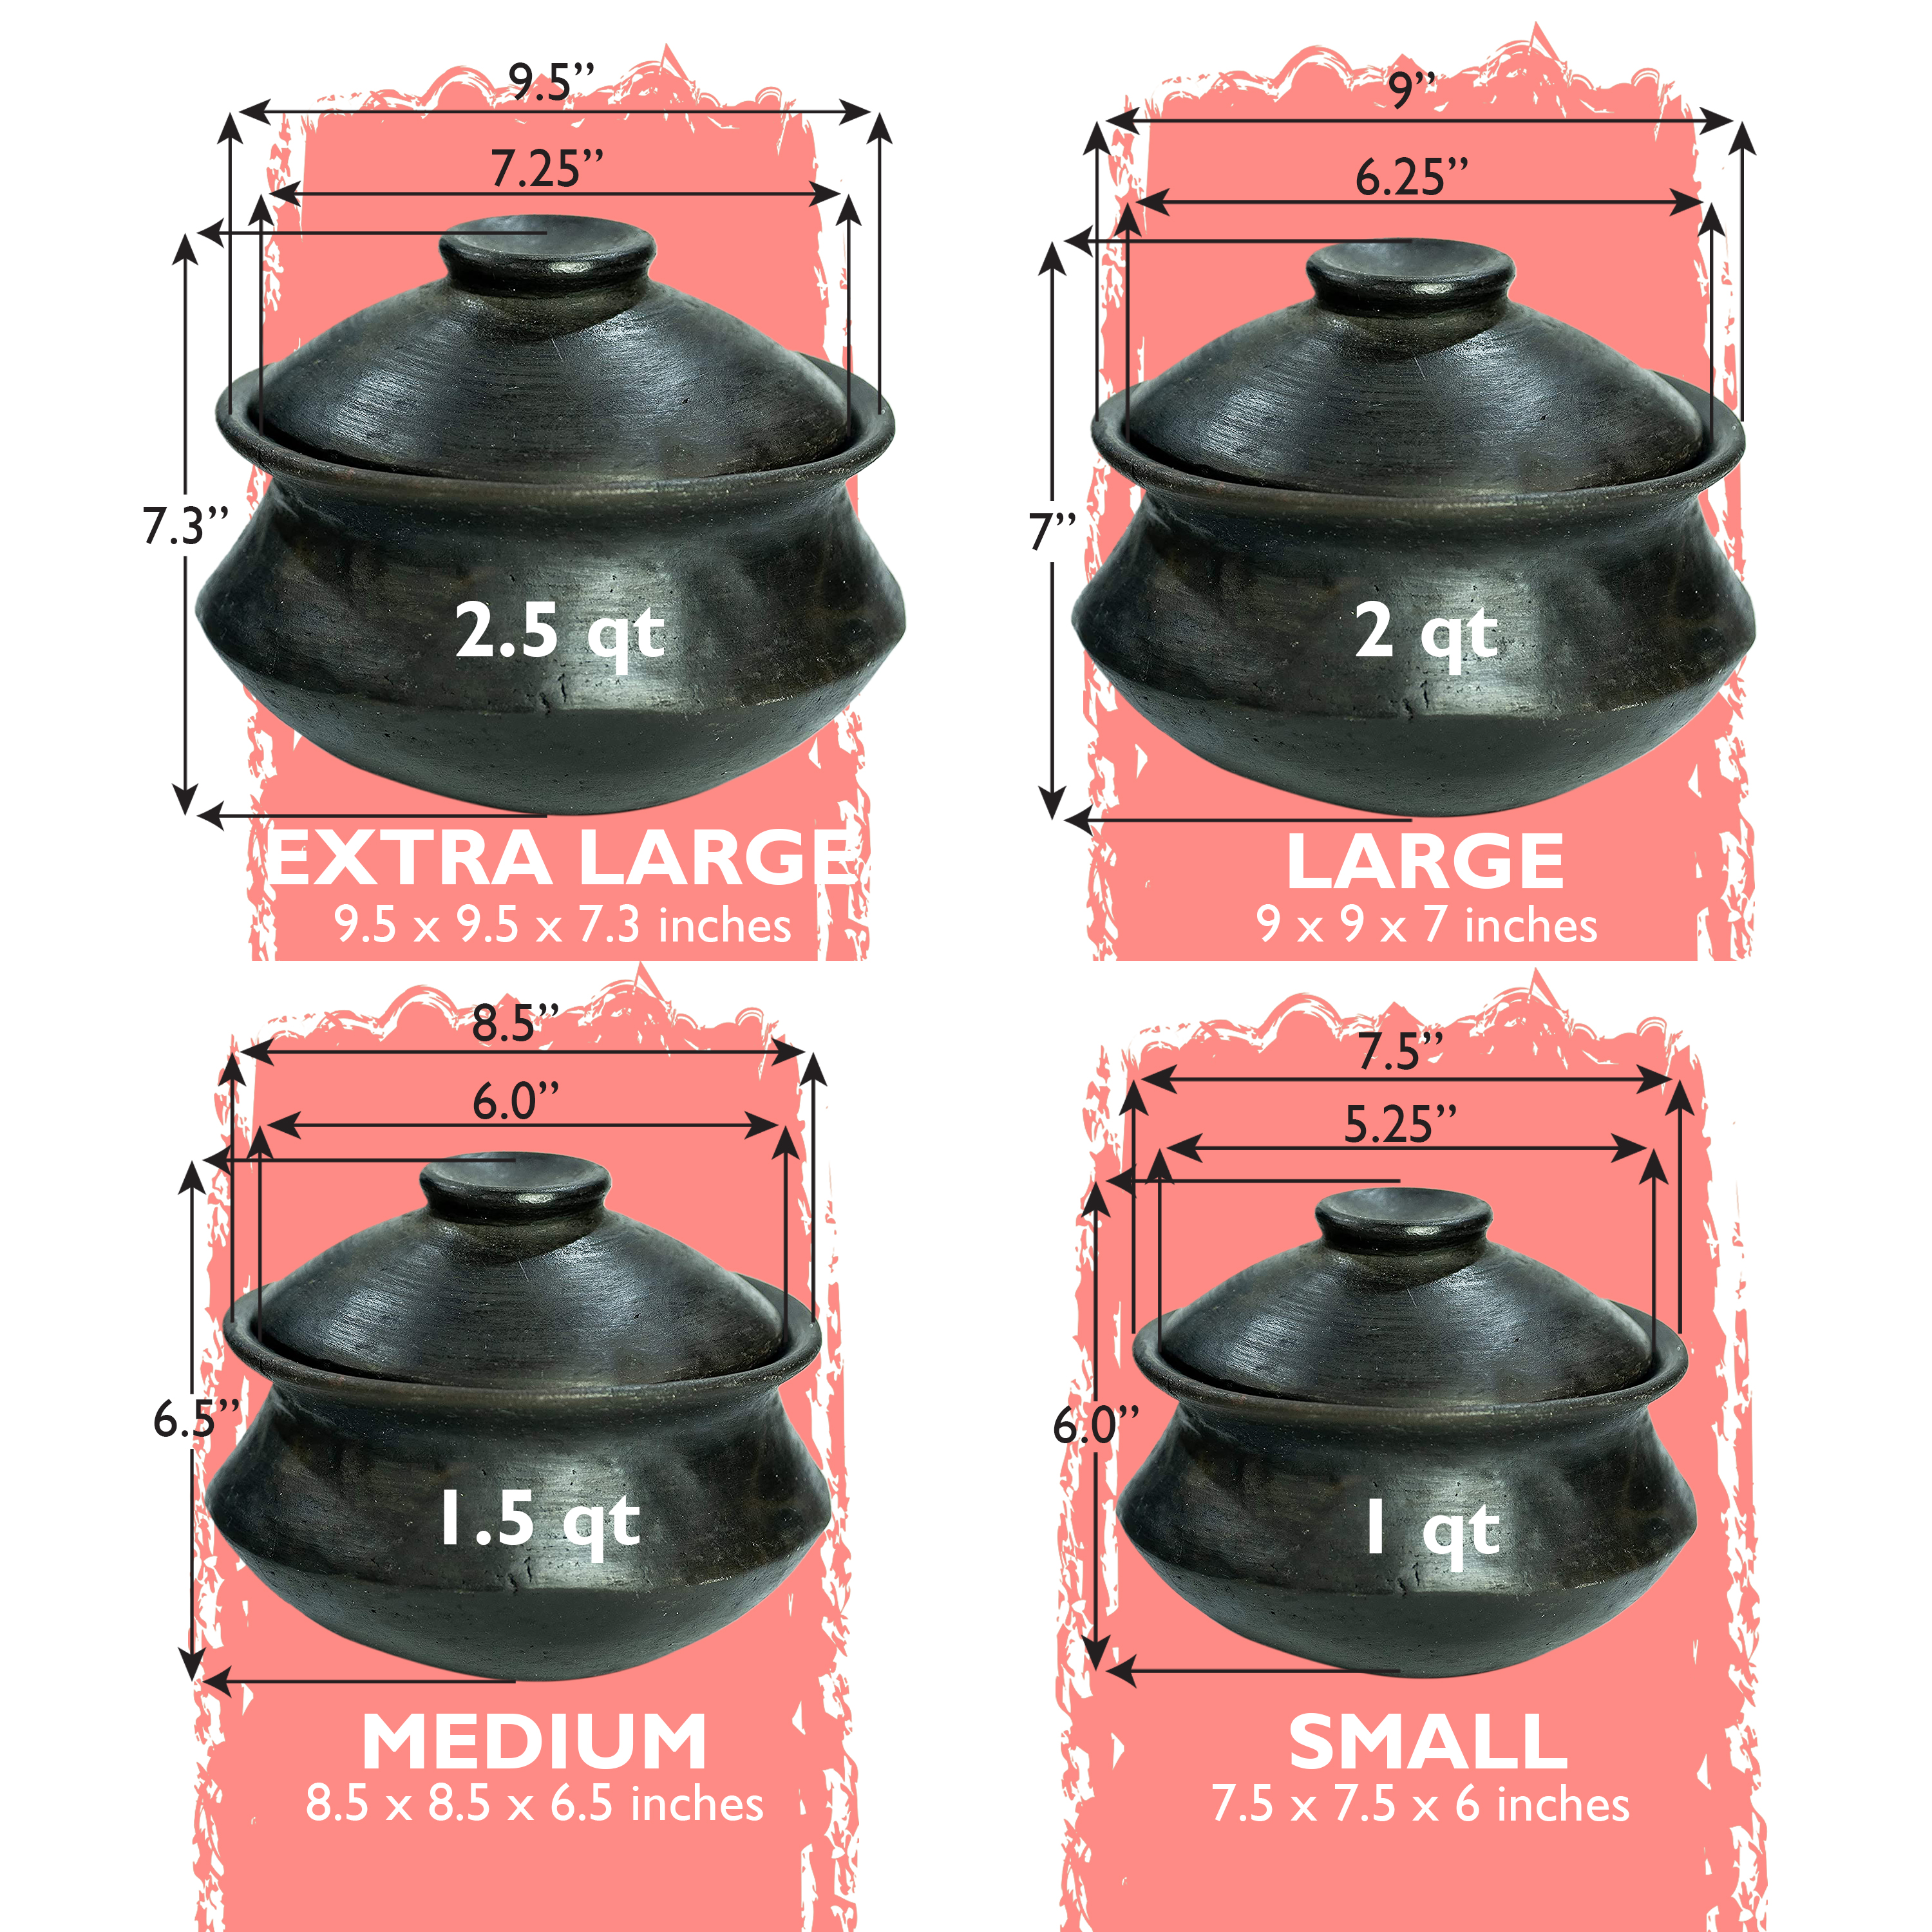 https://ancientcookware.com/images/stories/virtuemart/product/Palayok_with_sizes_all_four.jpg